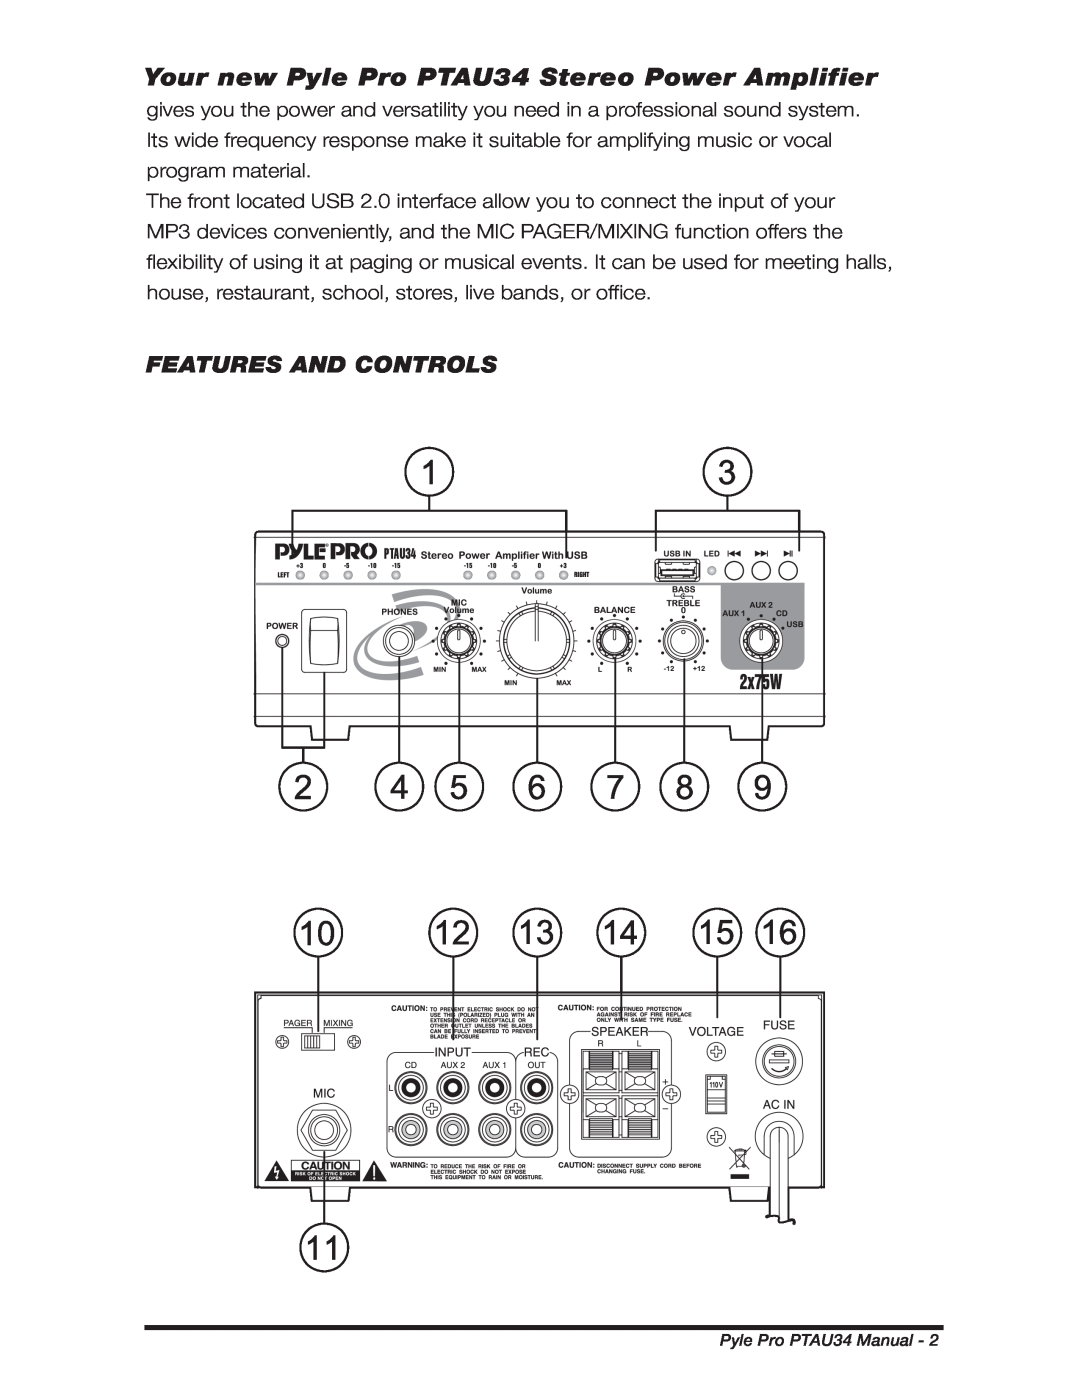 PYLE Audio manual Features And Controls, Your new Pyle Pro PTAU34 Stereo Power Amplifier 